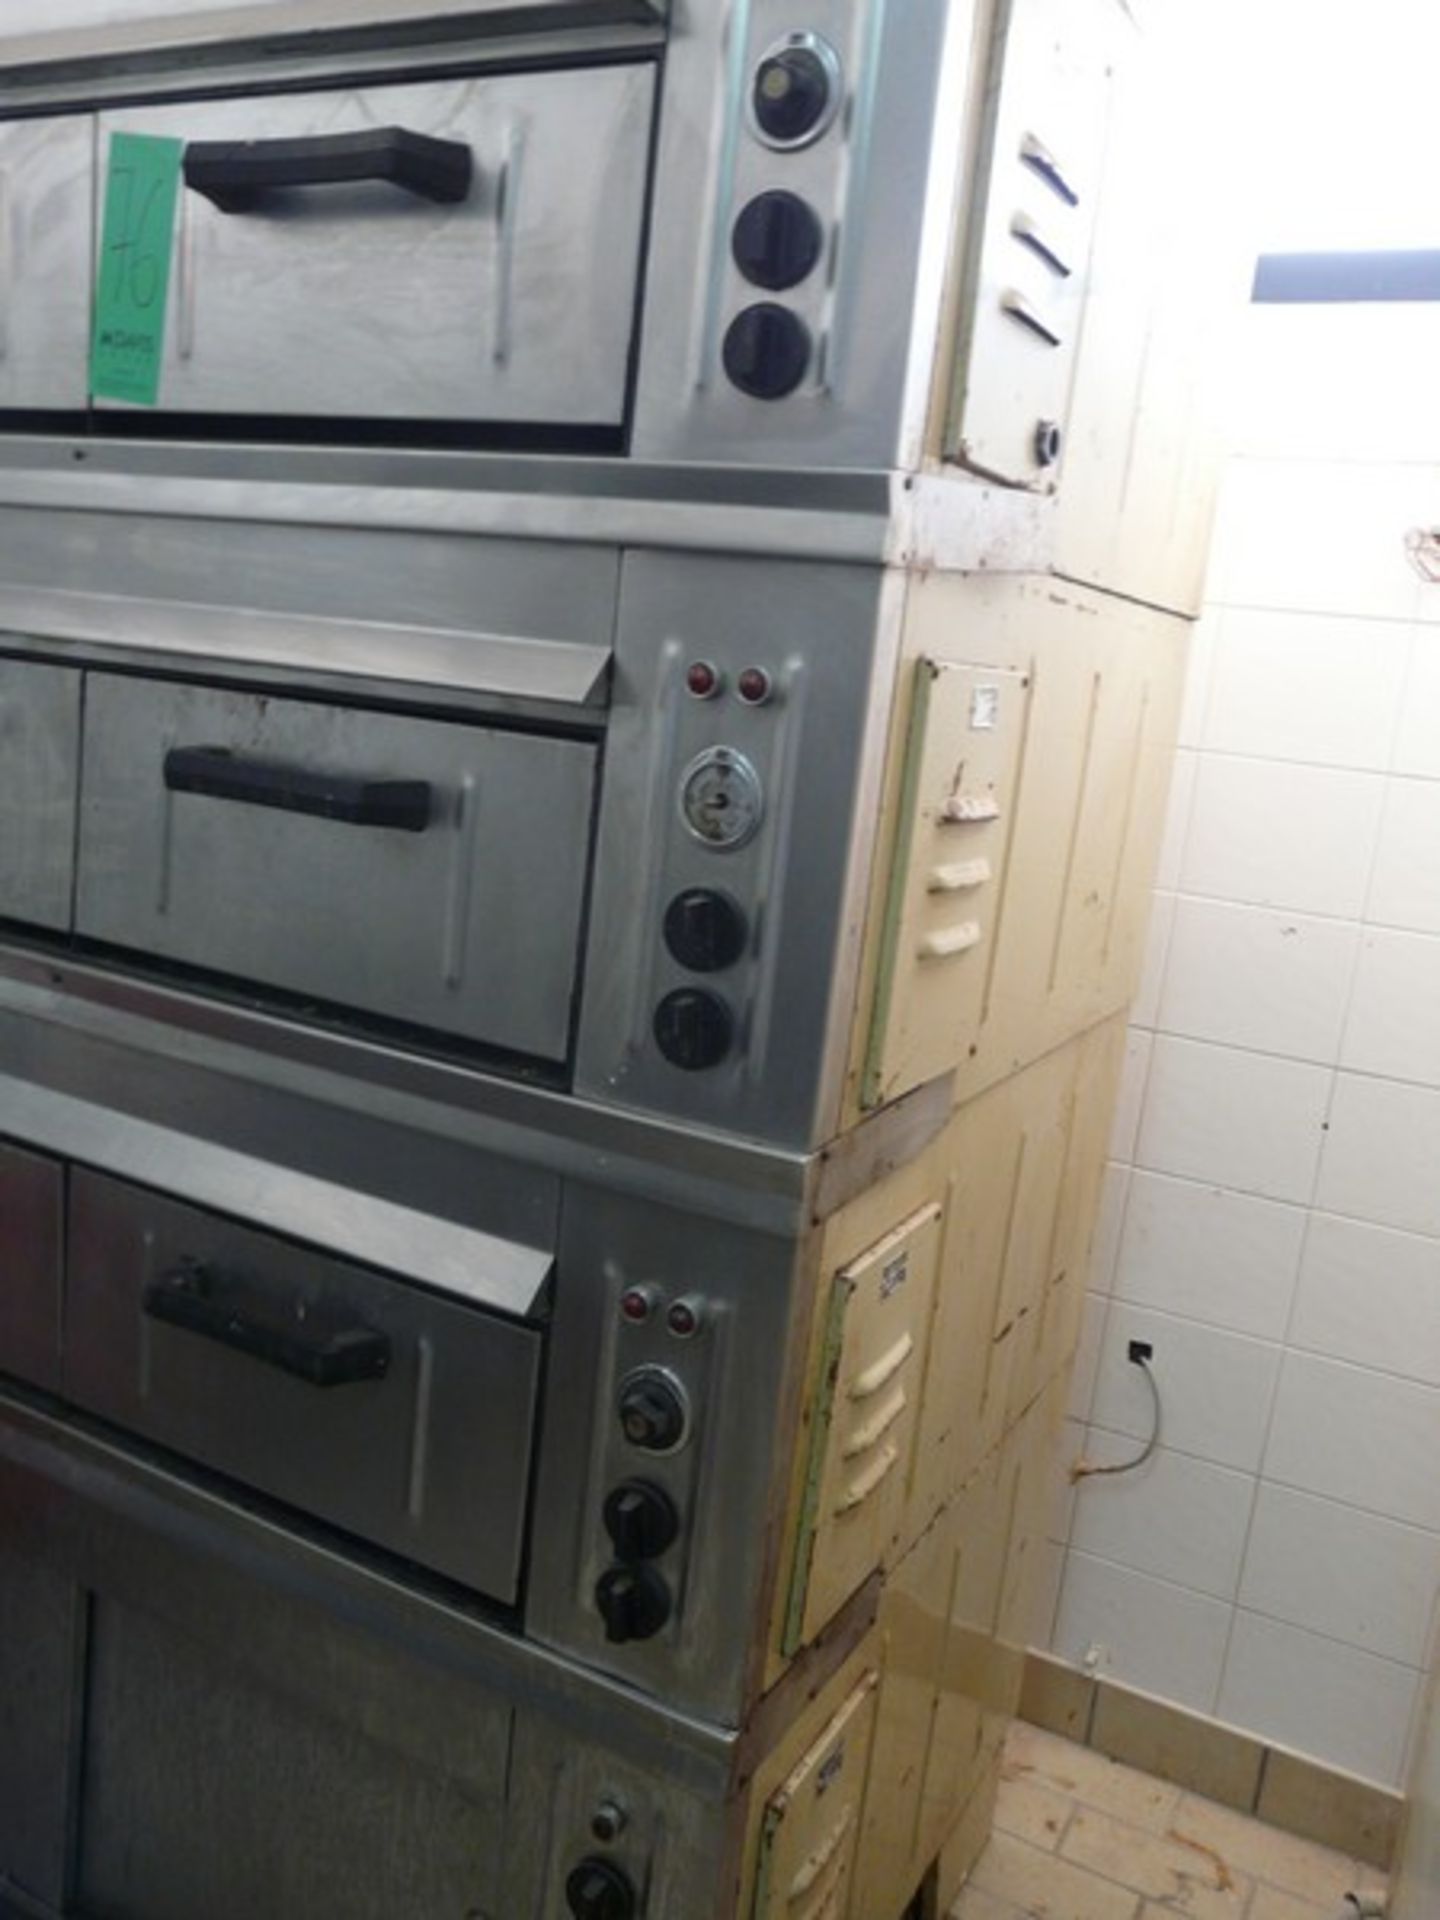 English: AMANK 3 Story Double Oven with Shelves and Plates, Heat Resistant Stone, 140x98x210 - Image 4 of 6